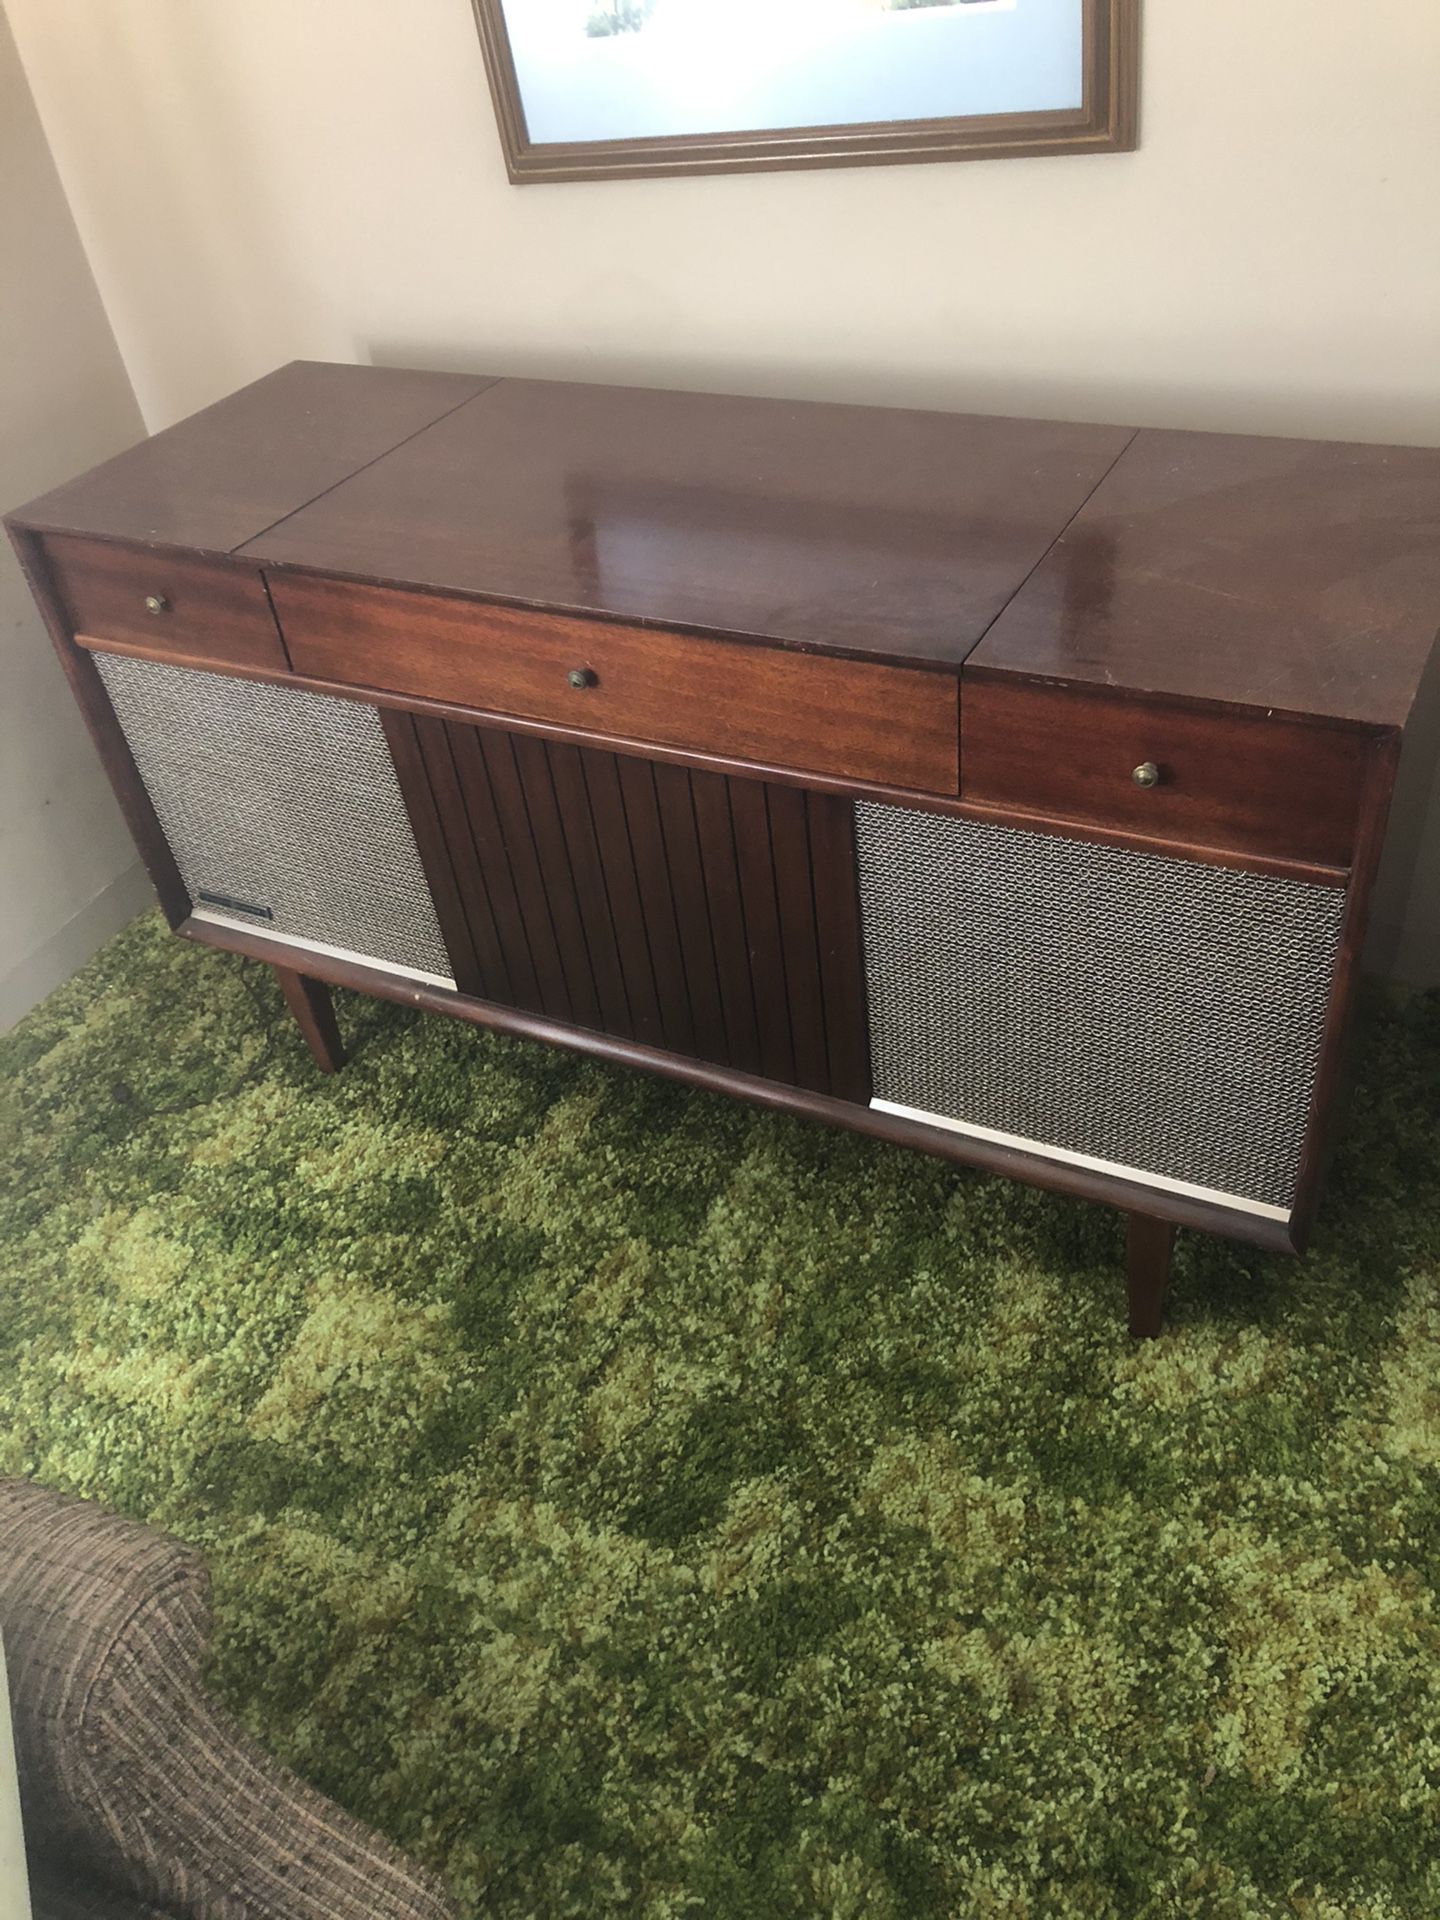 Mid-Century Modern console record player